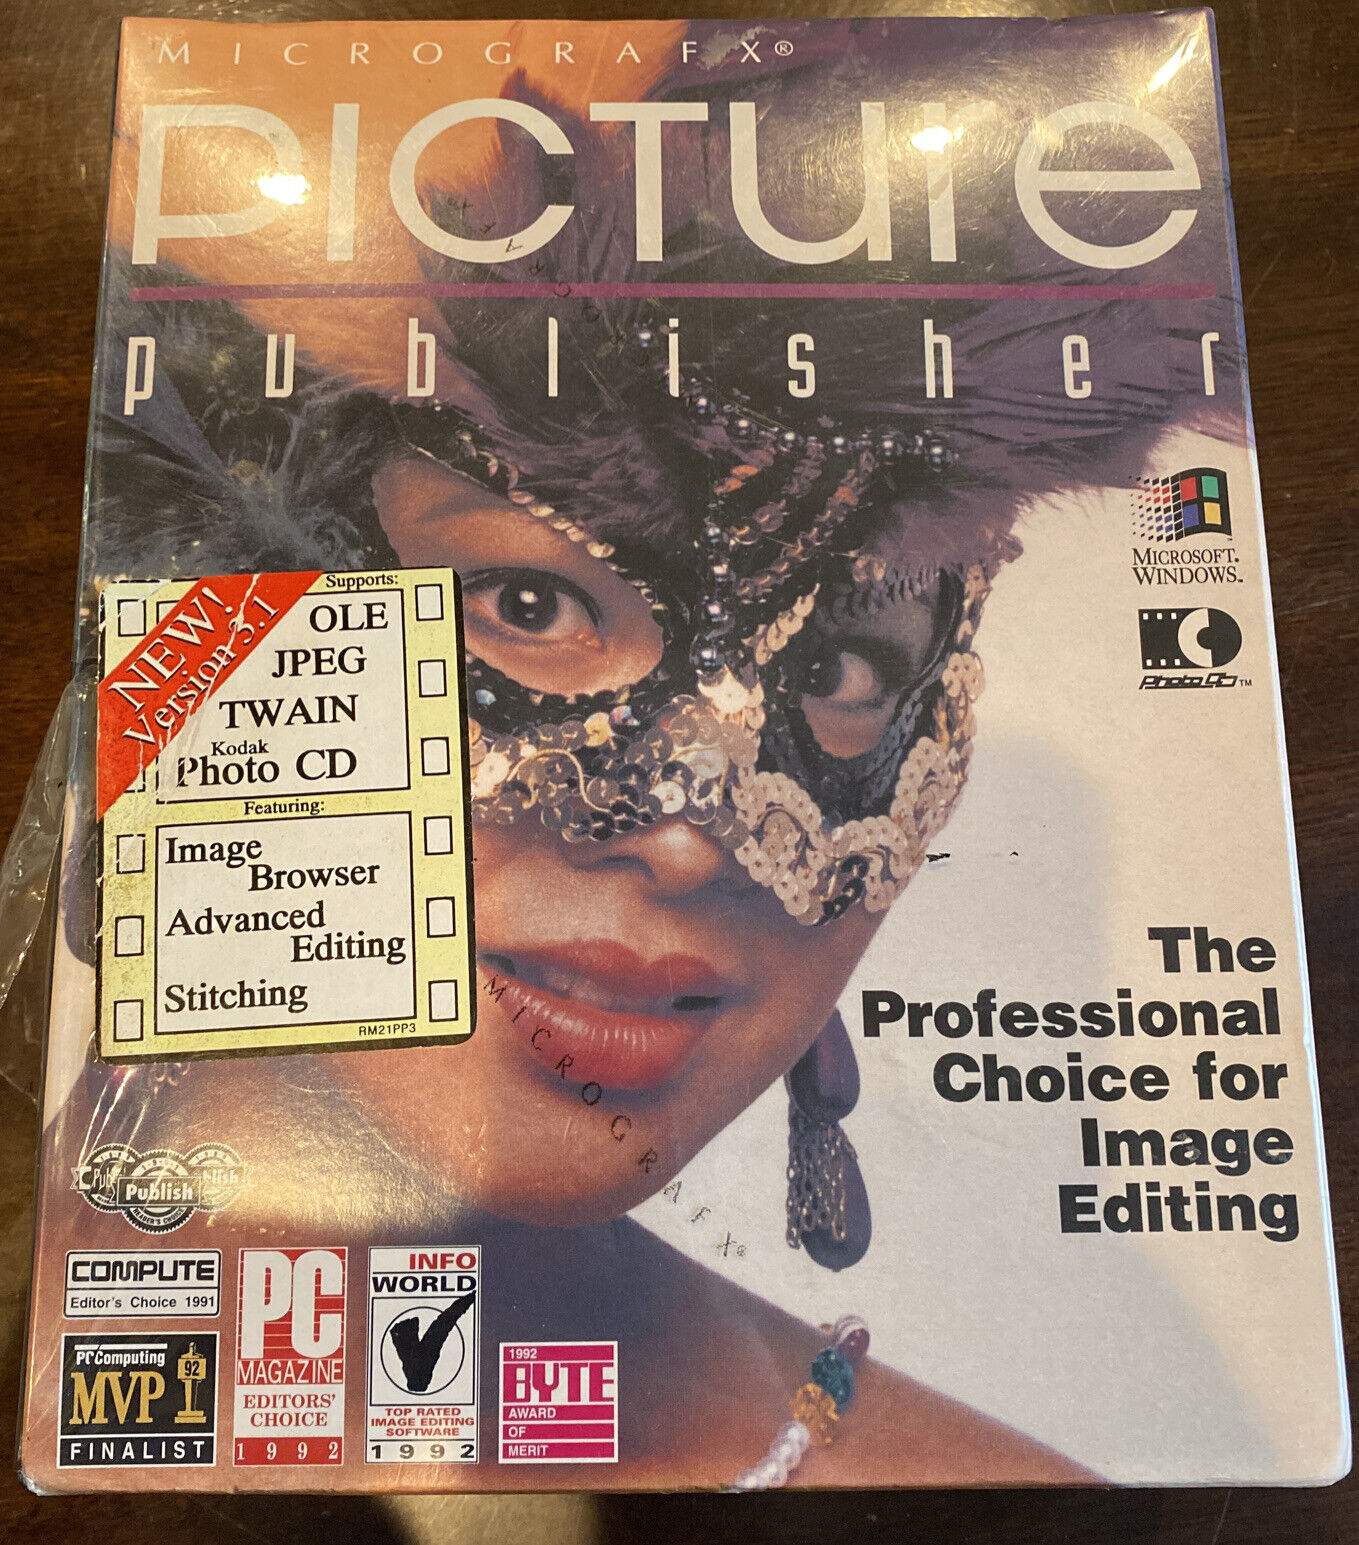 Picture Publisher Live 3.1 Software Micrografx Windows 1992 Image Editing Sealed